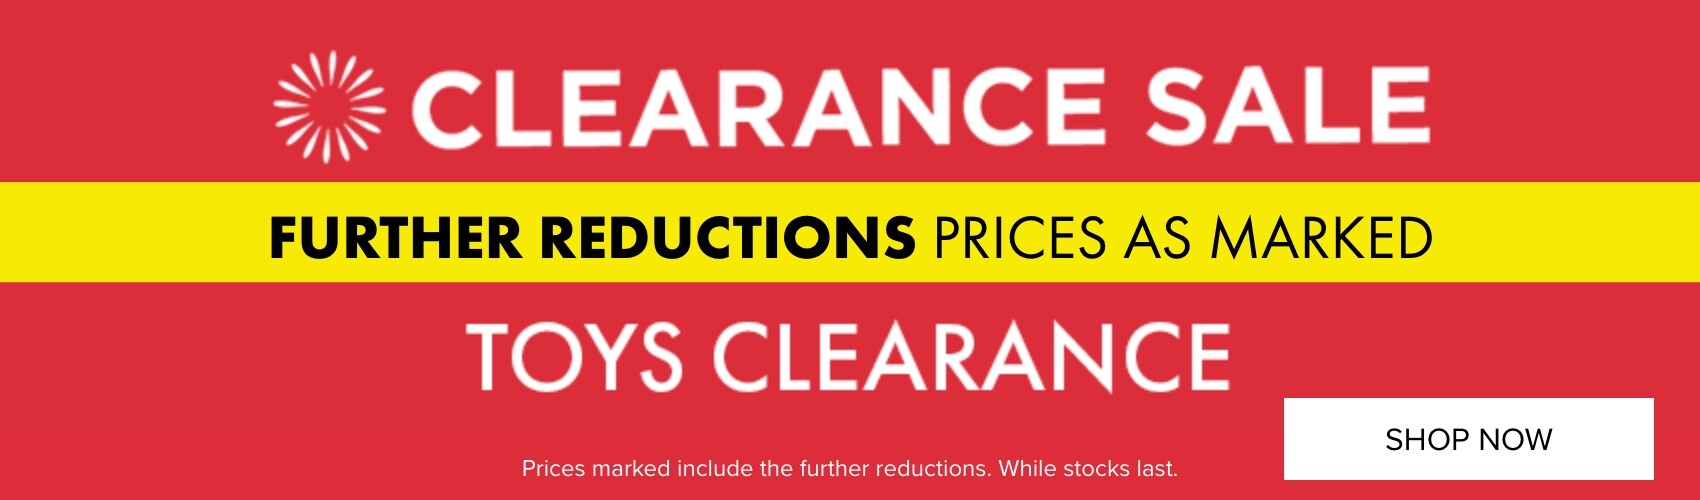 Toys Take a Further Clearance